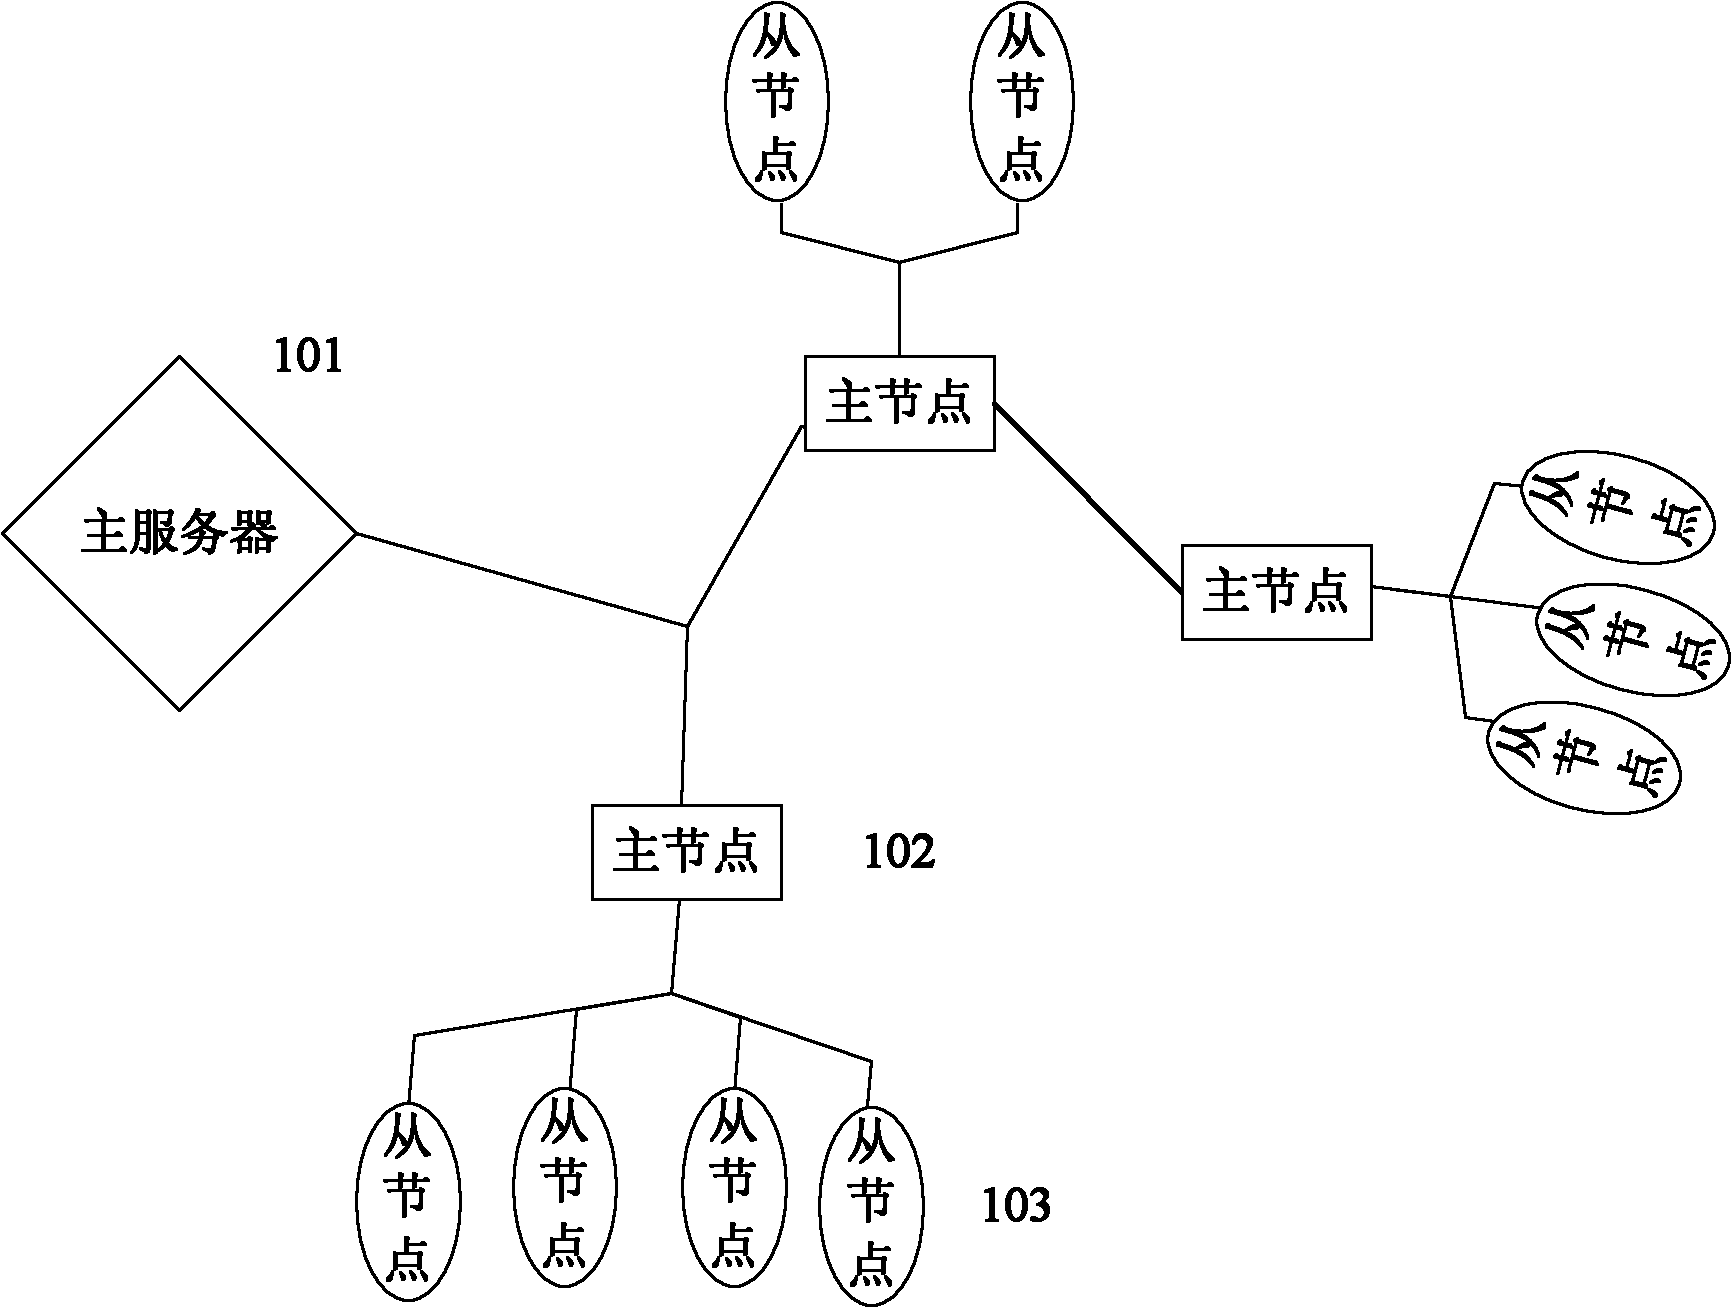 Information acquisition system based on Bluetooth Ad Hoc network